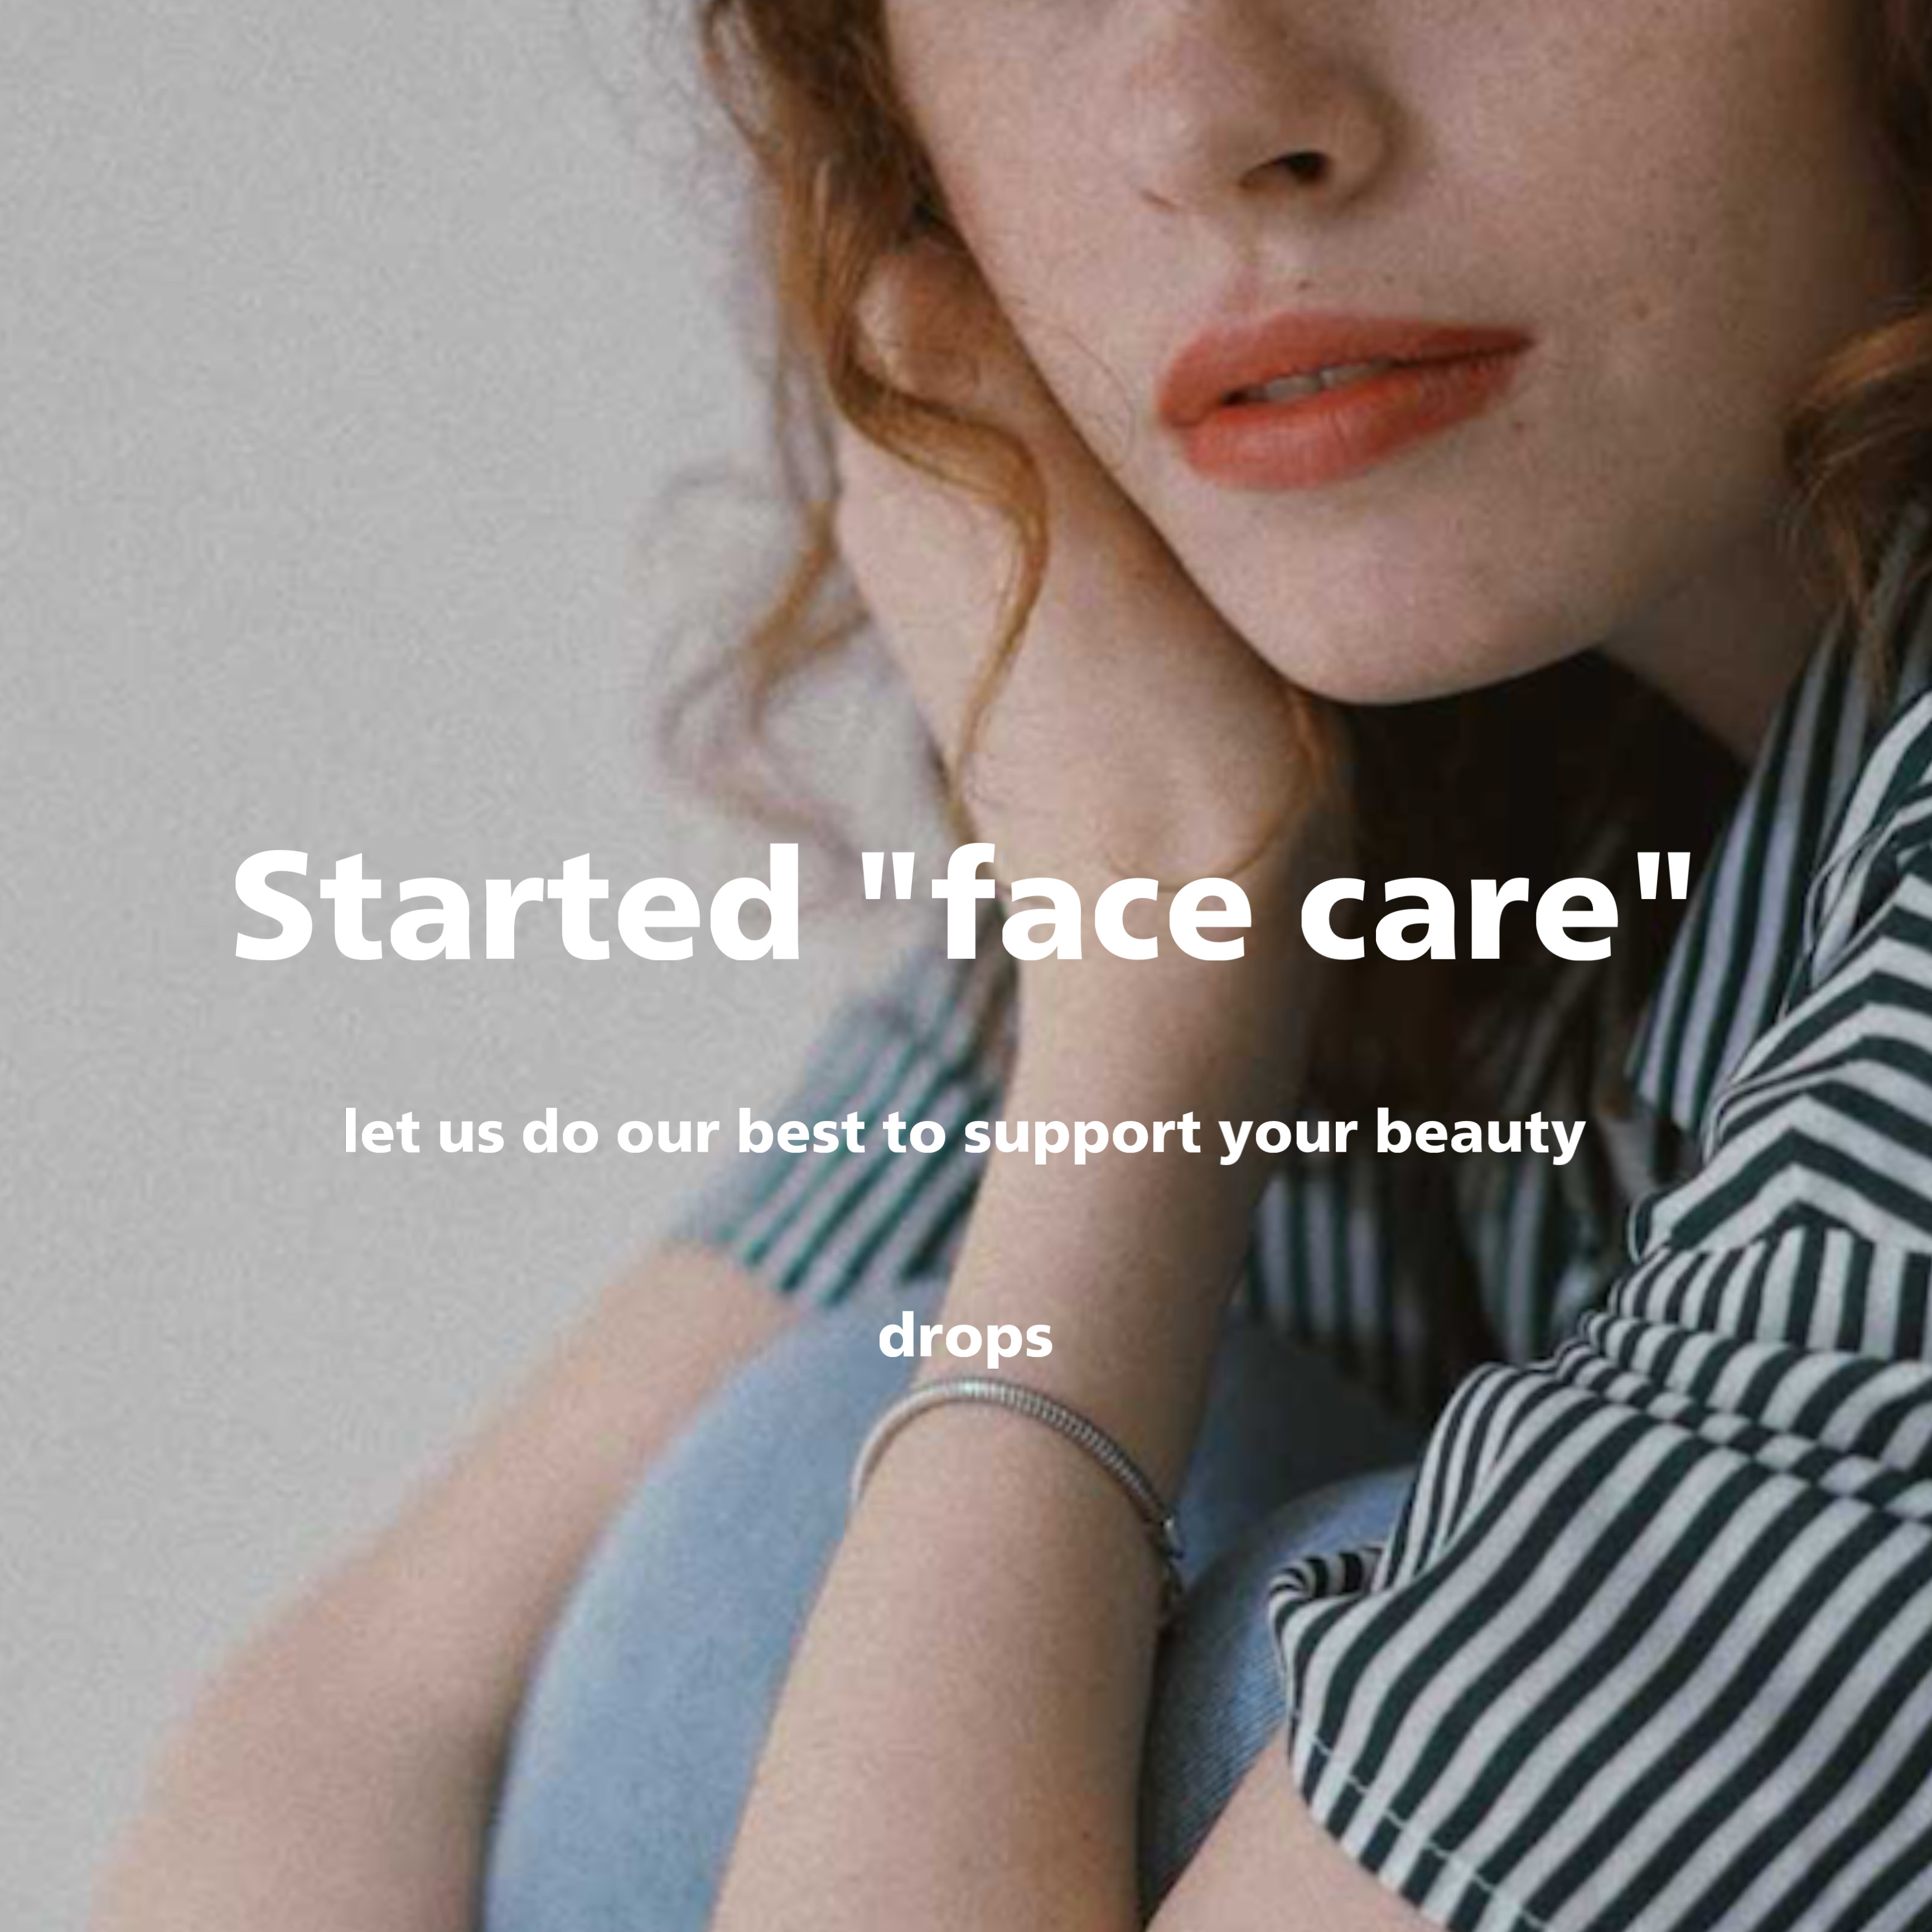 Face care will be your “FORTUNE” in the future.